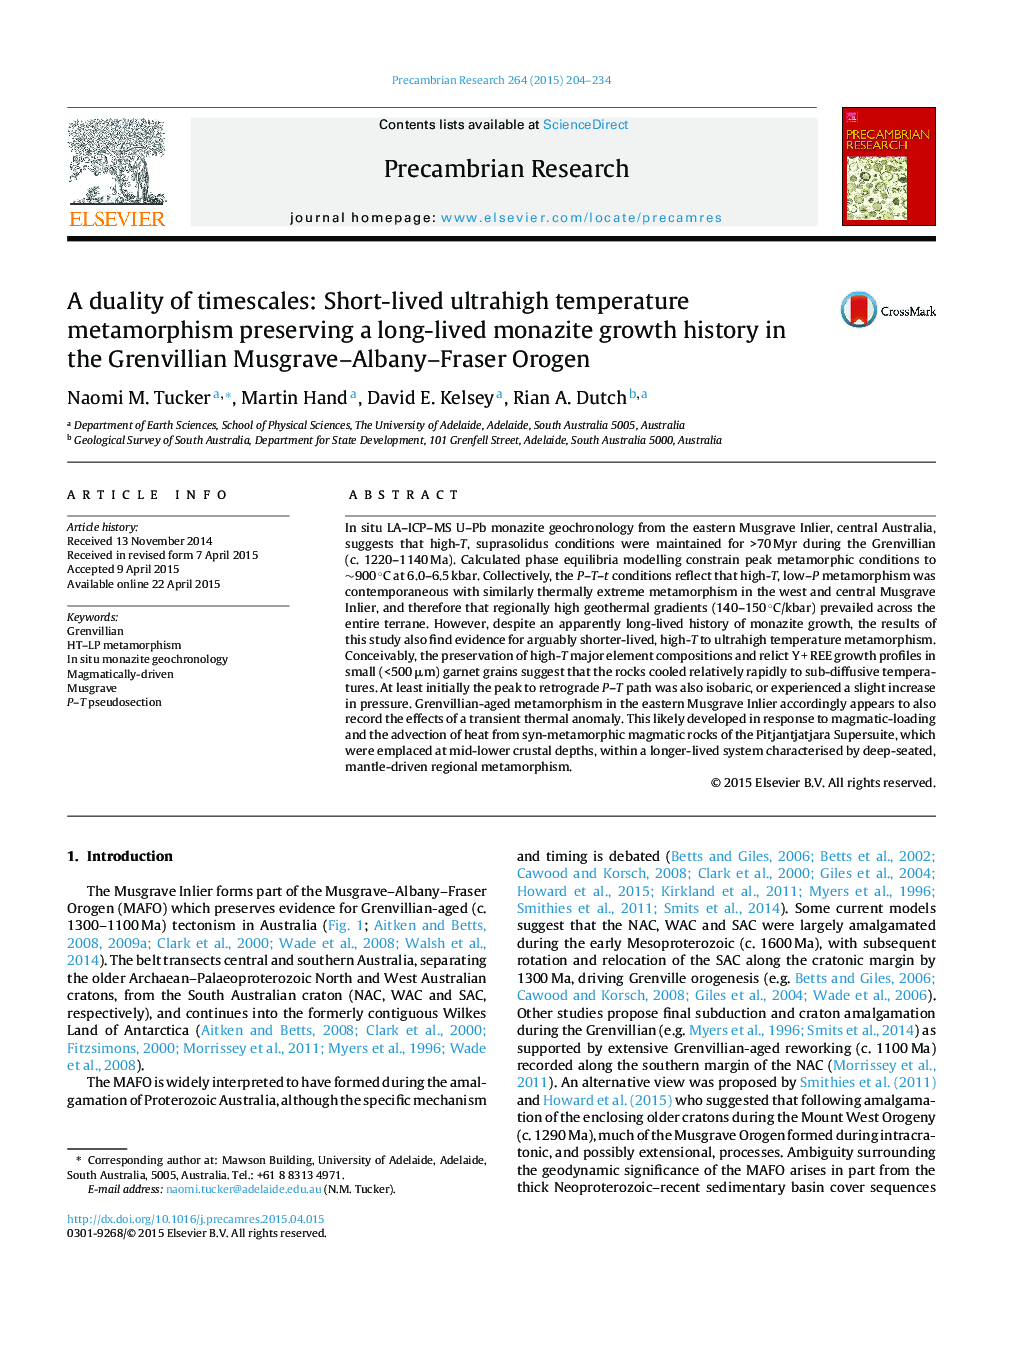 A duality of timescales: Short-lived ultrahigh temperature metamorphism preserving a long-lived monazite growth history in the Grenvillian Musgrave–Albany–Fraser Orogen